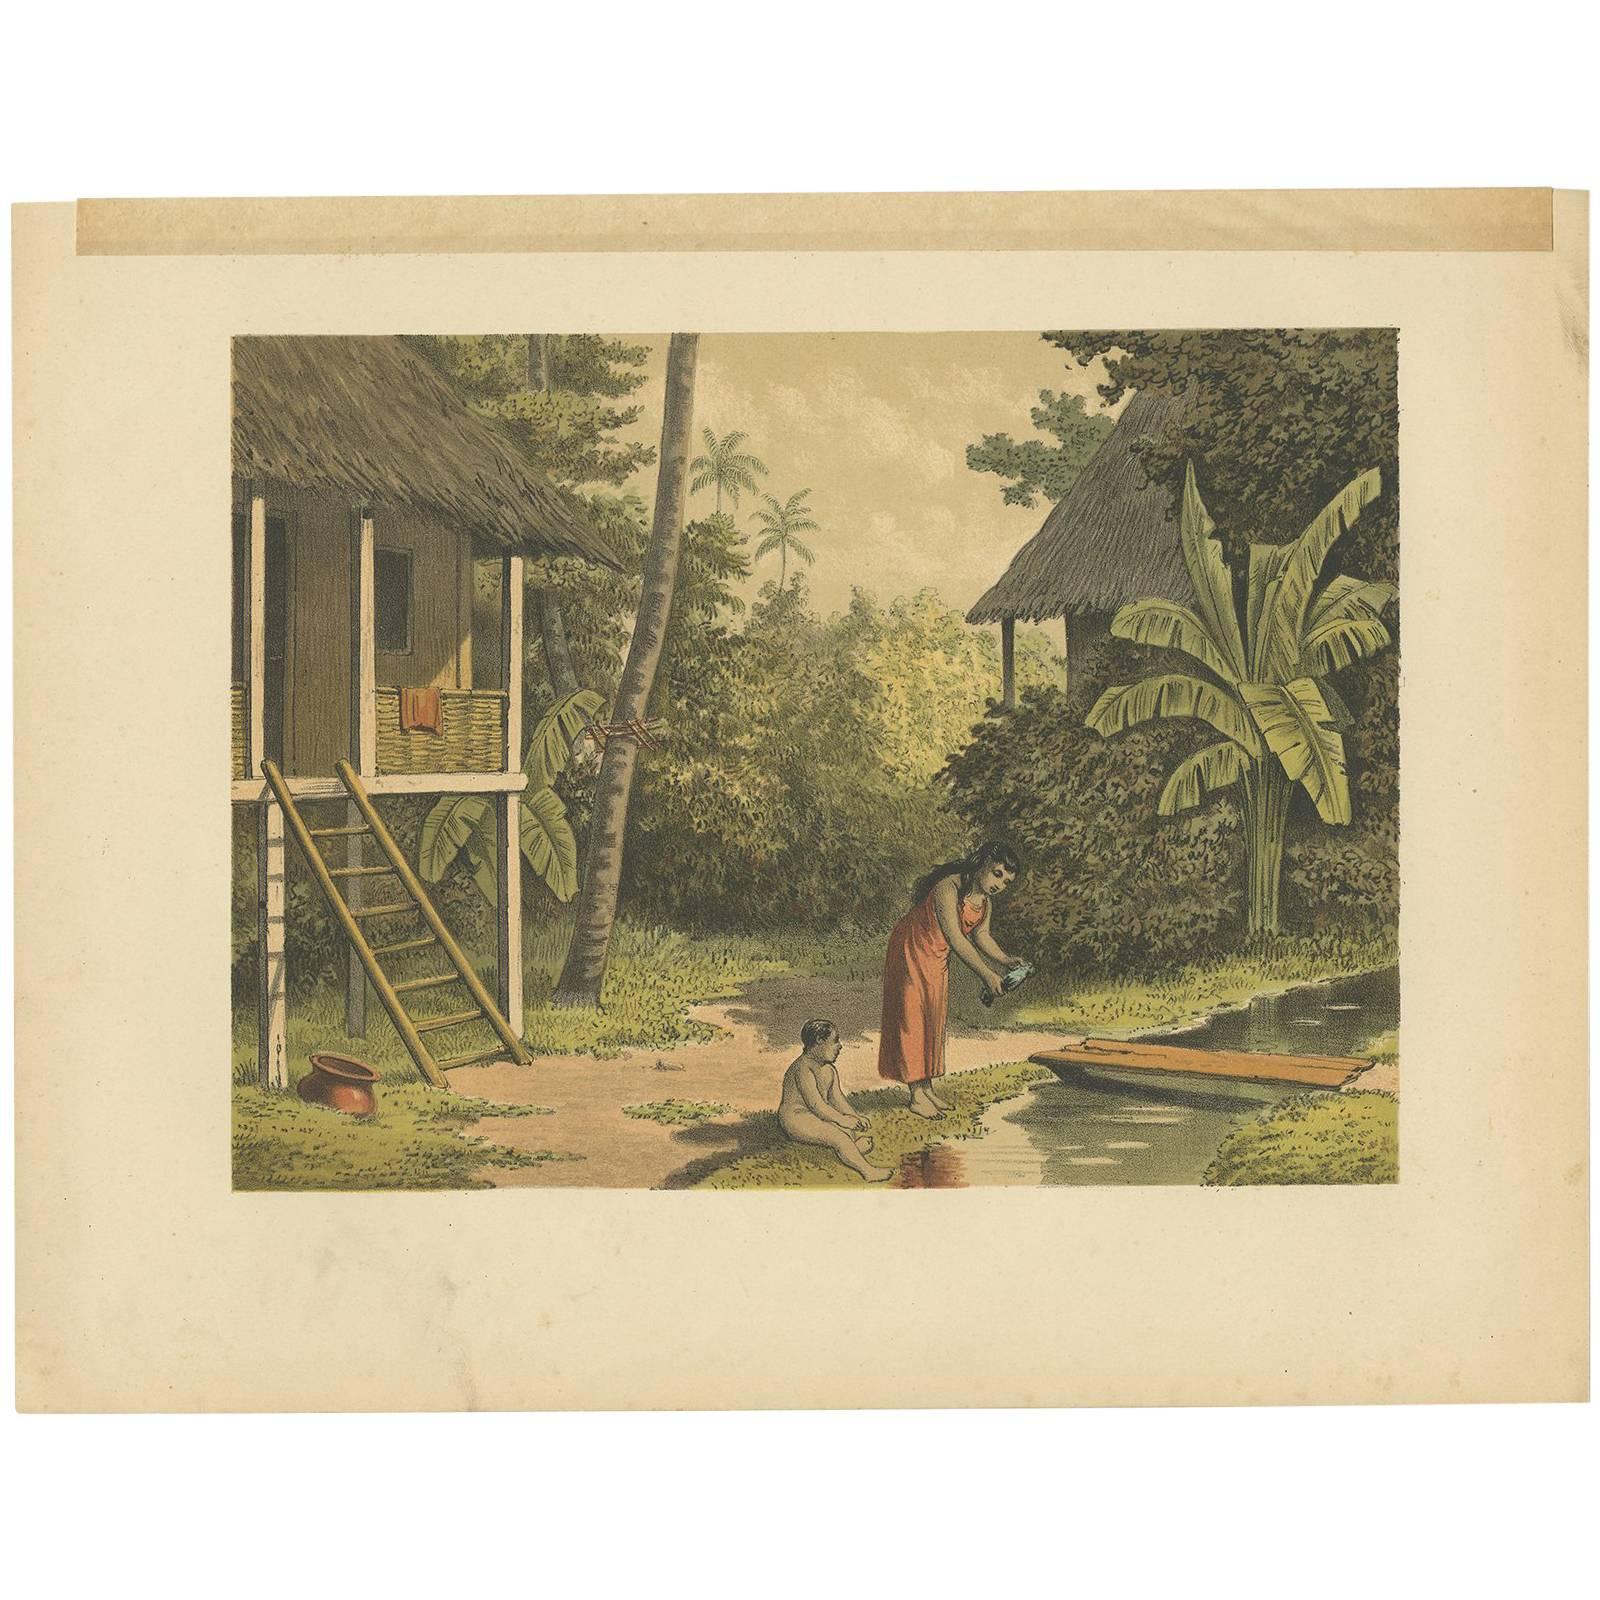 Antique Print of a House in Oleh-Leh 'Aceh' by M.T.H. Perelaer, 1888